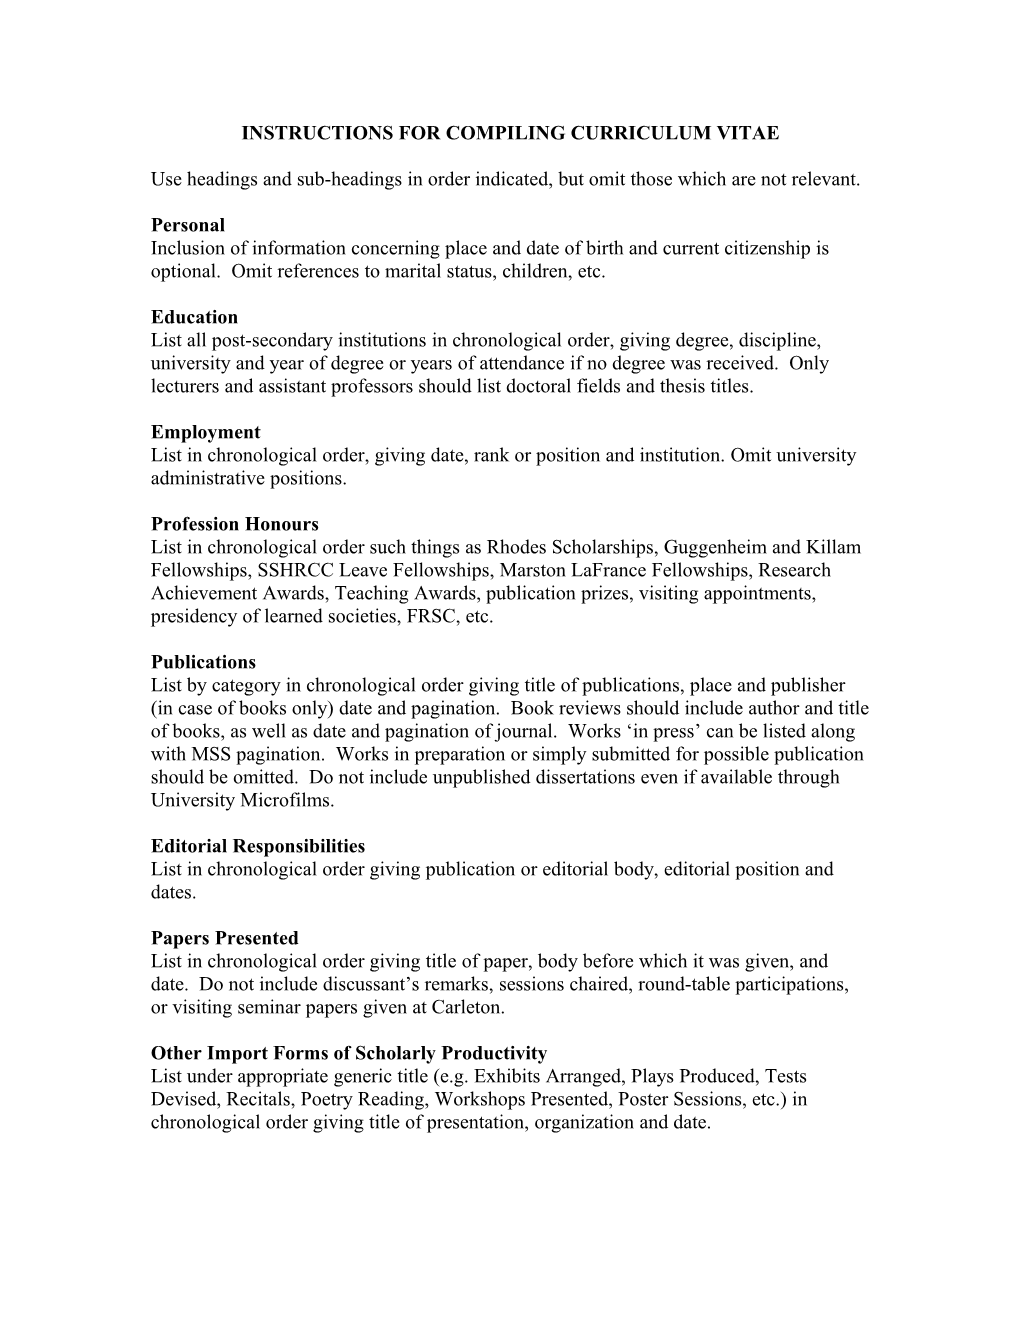 Instructions for Compling Curriculum Vitae